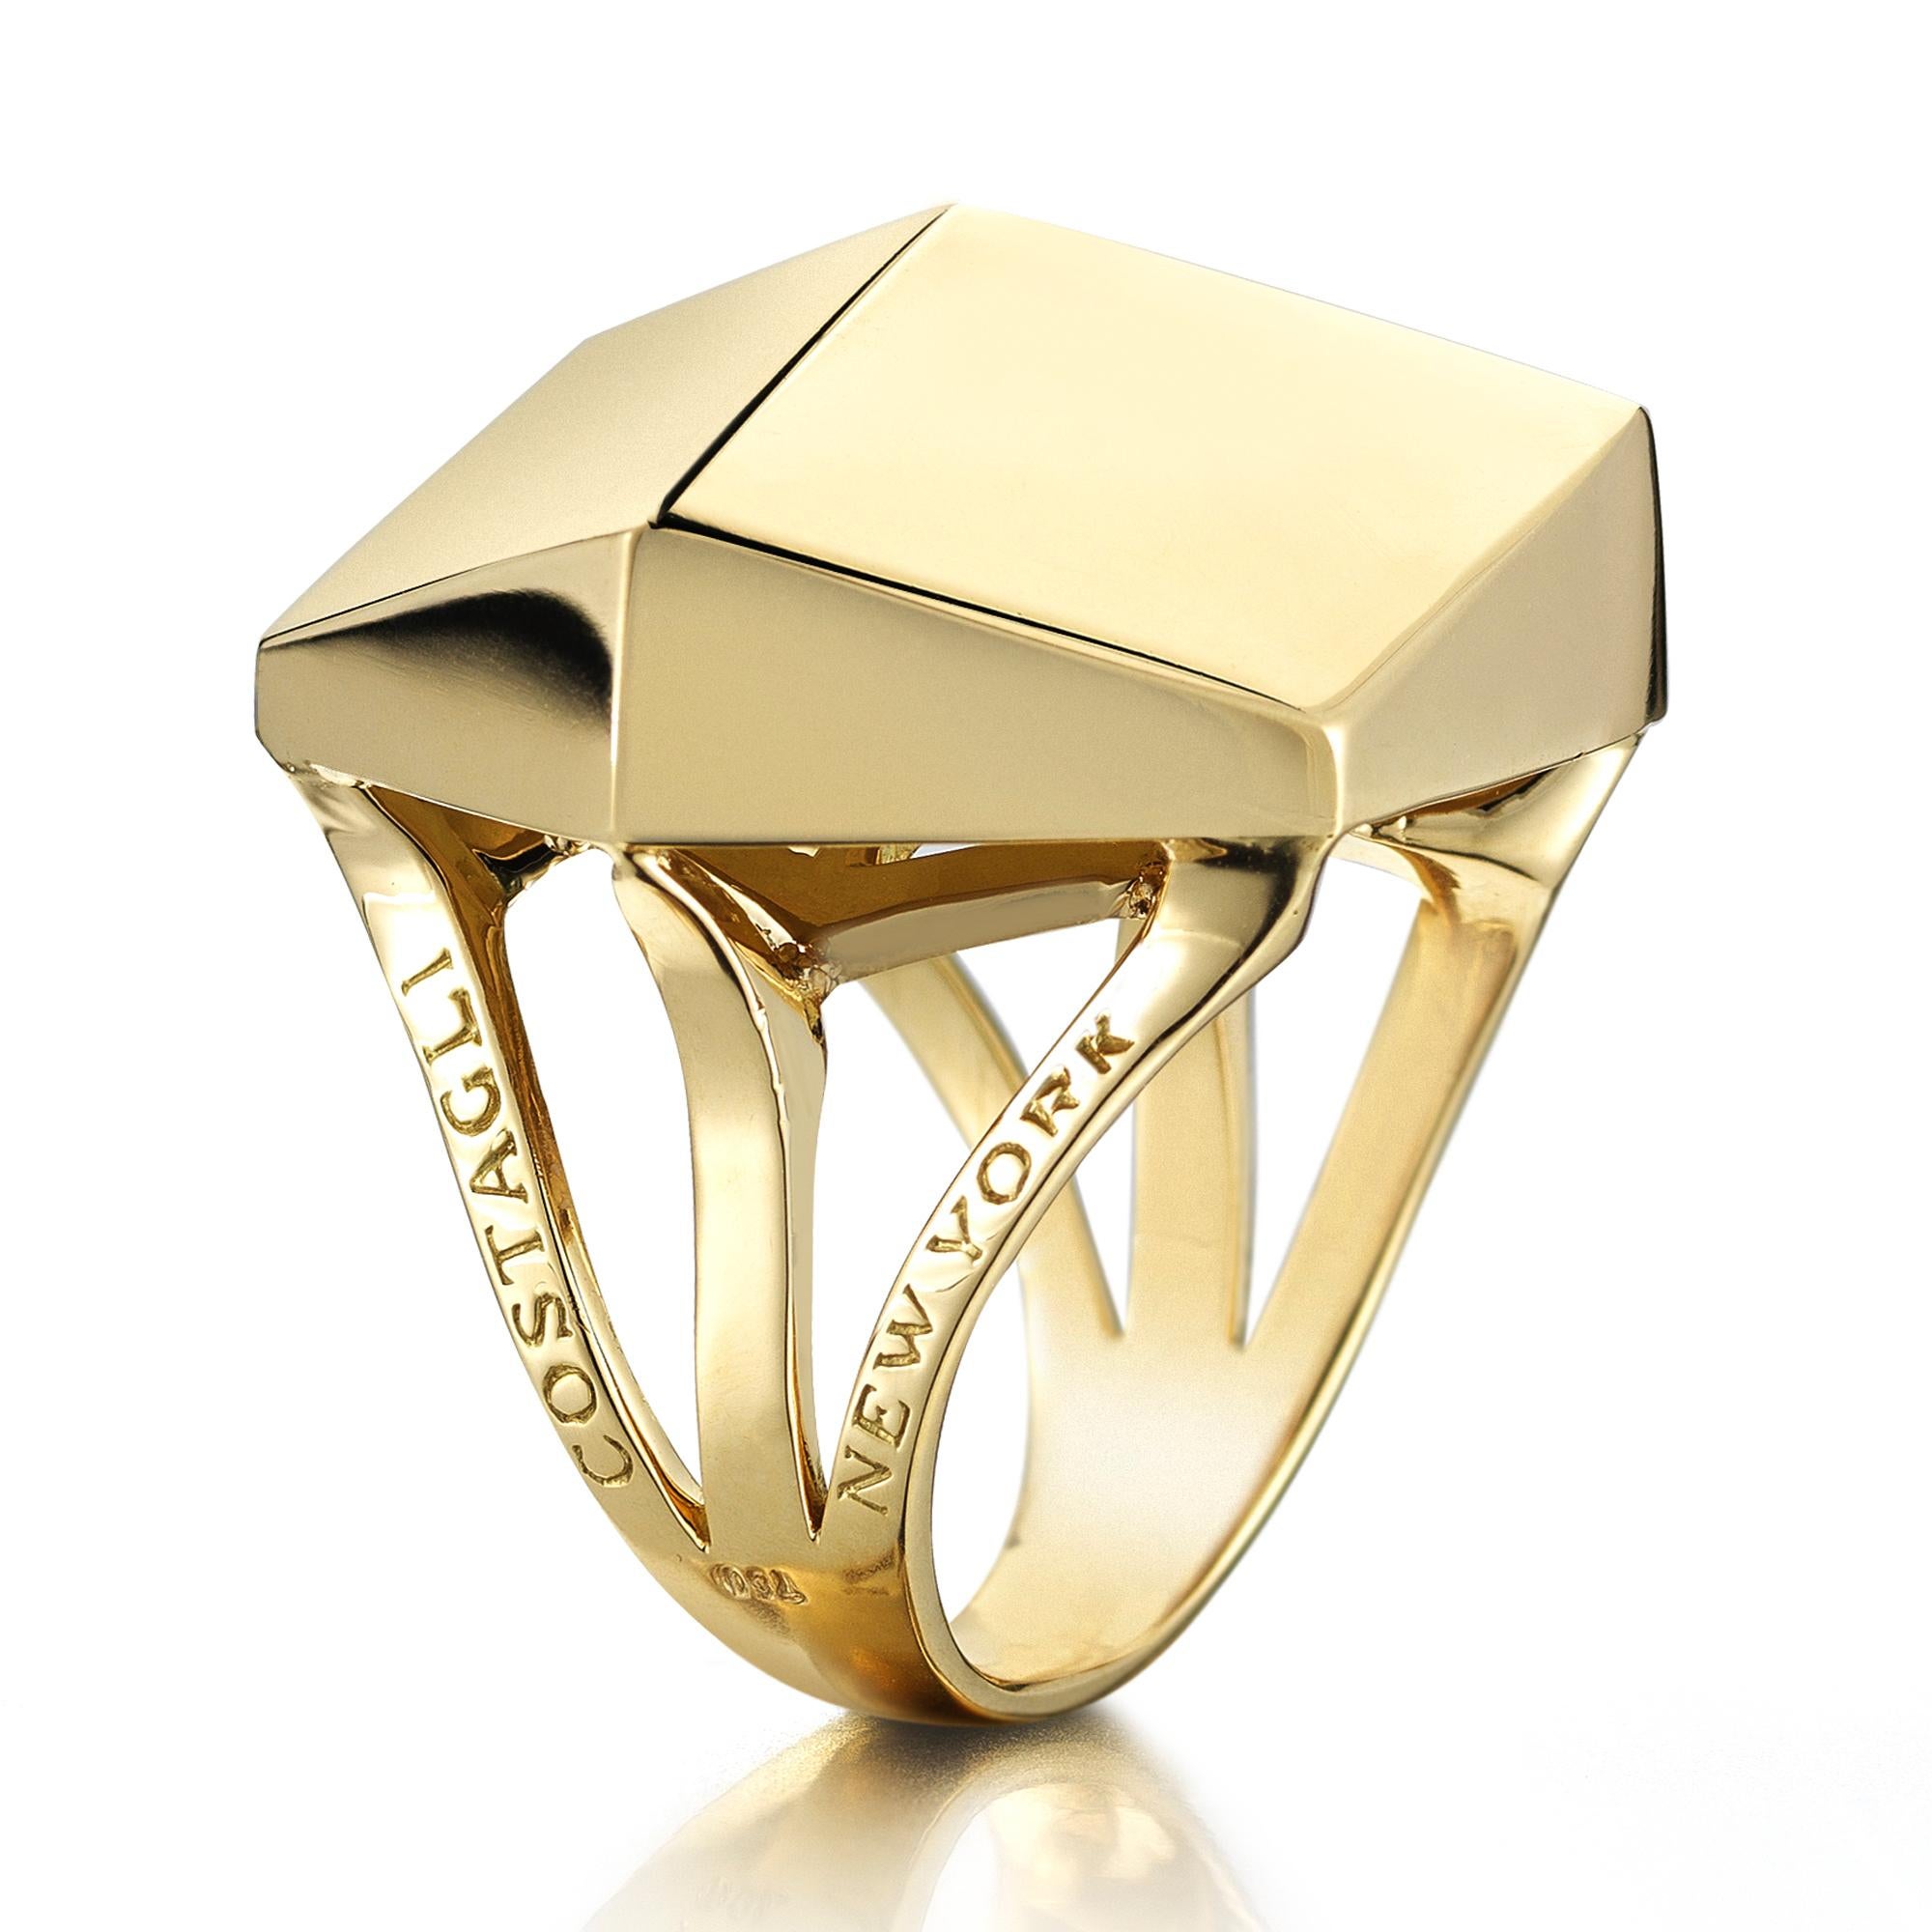 High polish 18kt yellow gold cocktail ring from the Brillante® collection.

Translated from a quintessential Venetian motif, the Brillante® jewelry collection combines strong jewelry design, cutting edge technology and fine engineering.

A bracelet